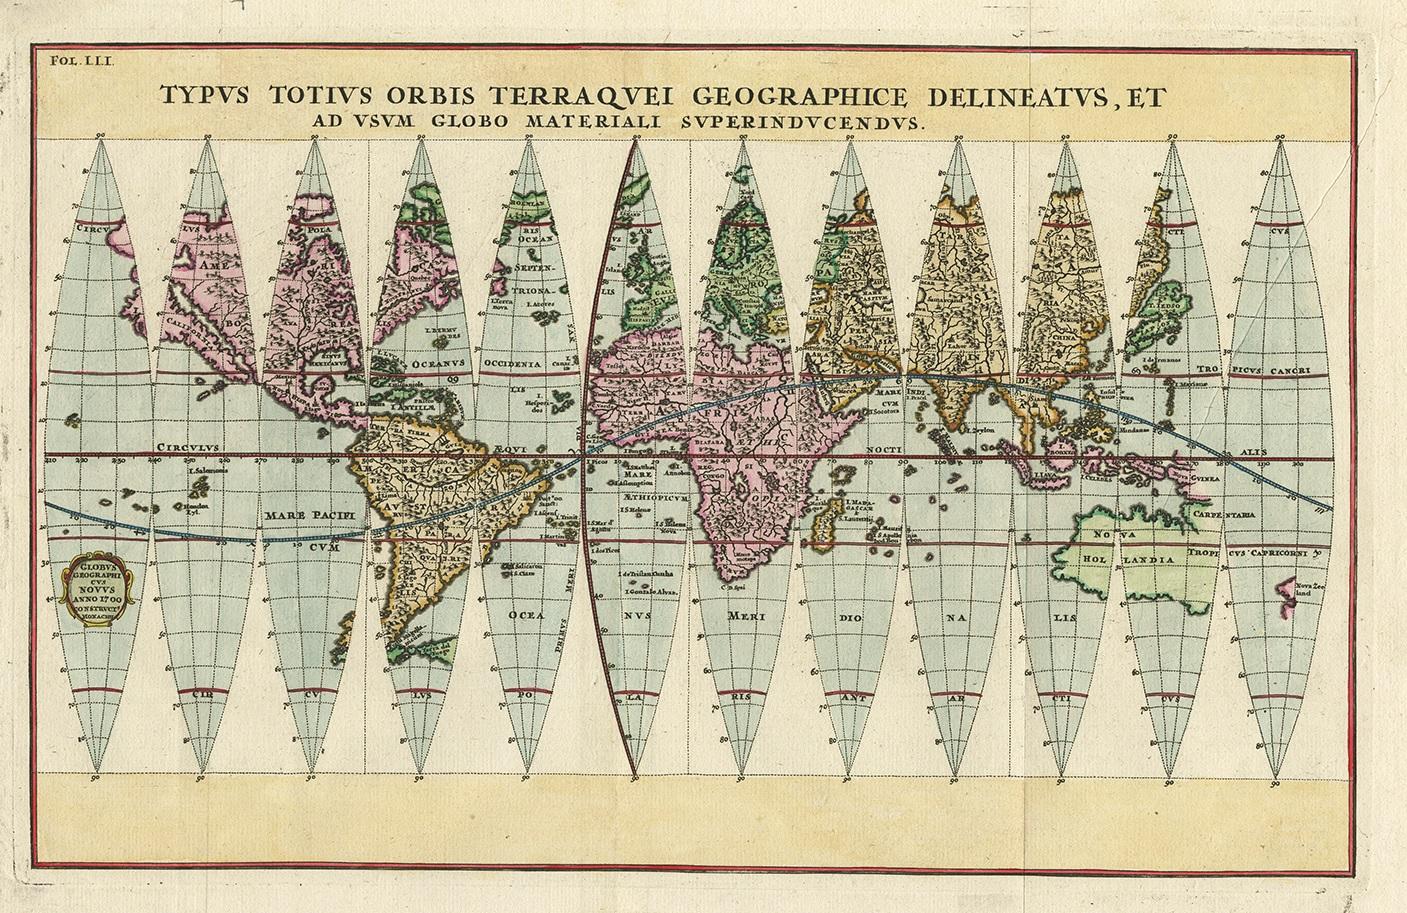 Antique map titled 'Typus Totius Orbis Terraquei Geographice Delineatus, Et Ad Usum Globo Materiali Superinducendus'. Beautiful example of Scherer's map of the World, configured in 12 globe gores. California is shown as an island. Fascinating